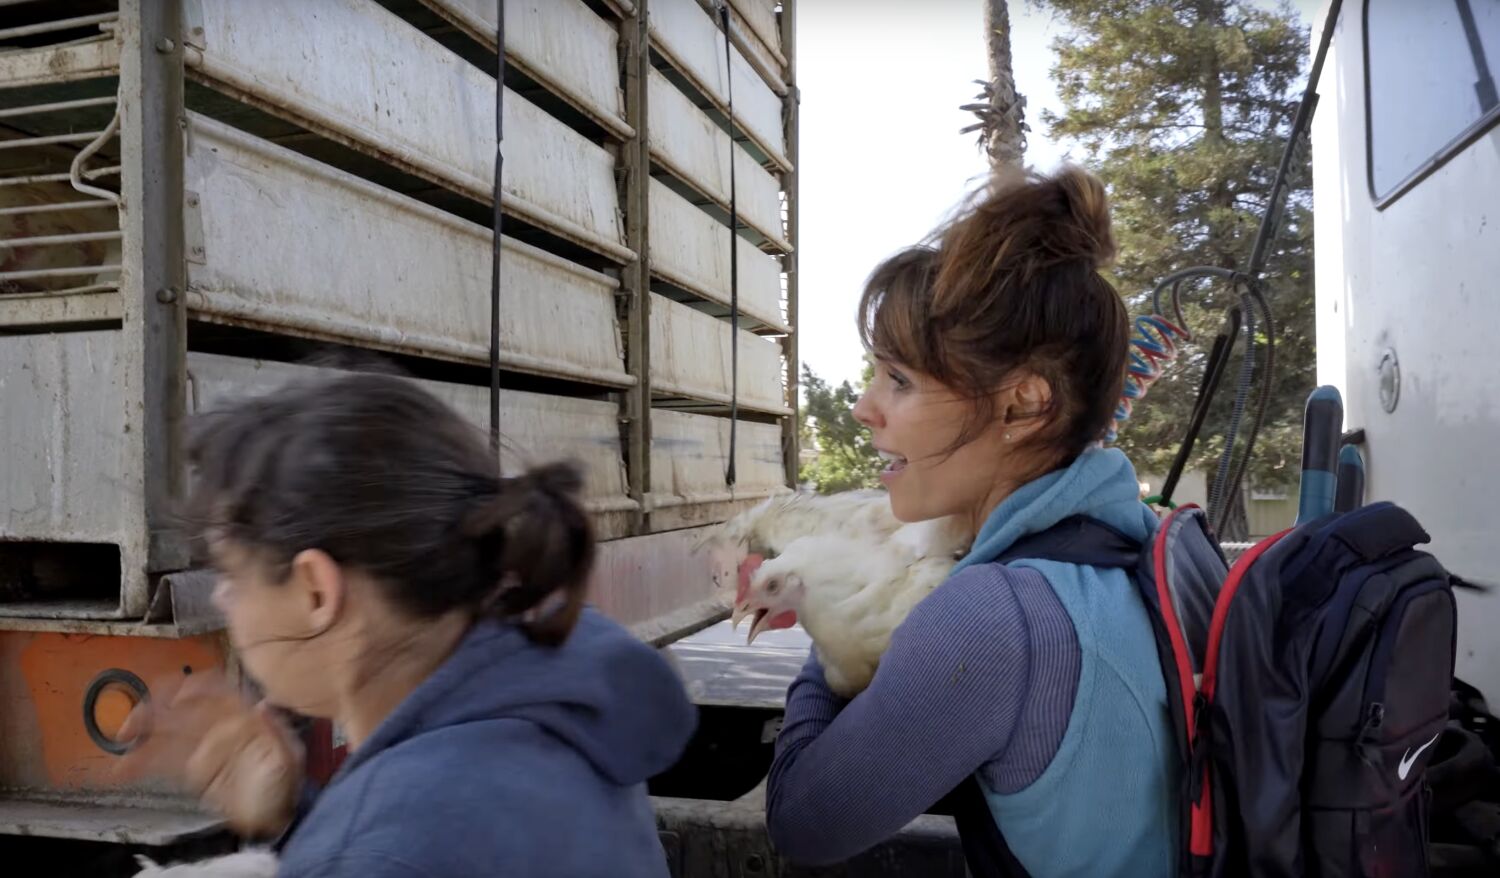 'Baywatch's' Alexandra Paul on trial; video shows 'open rescue' of Foster Farms chickens